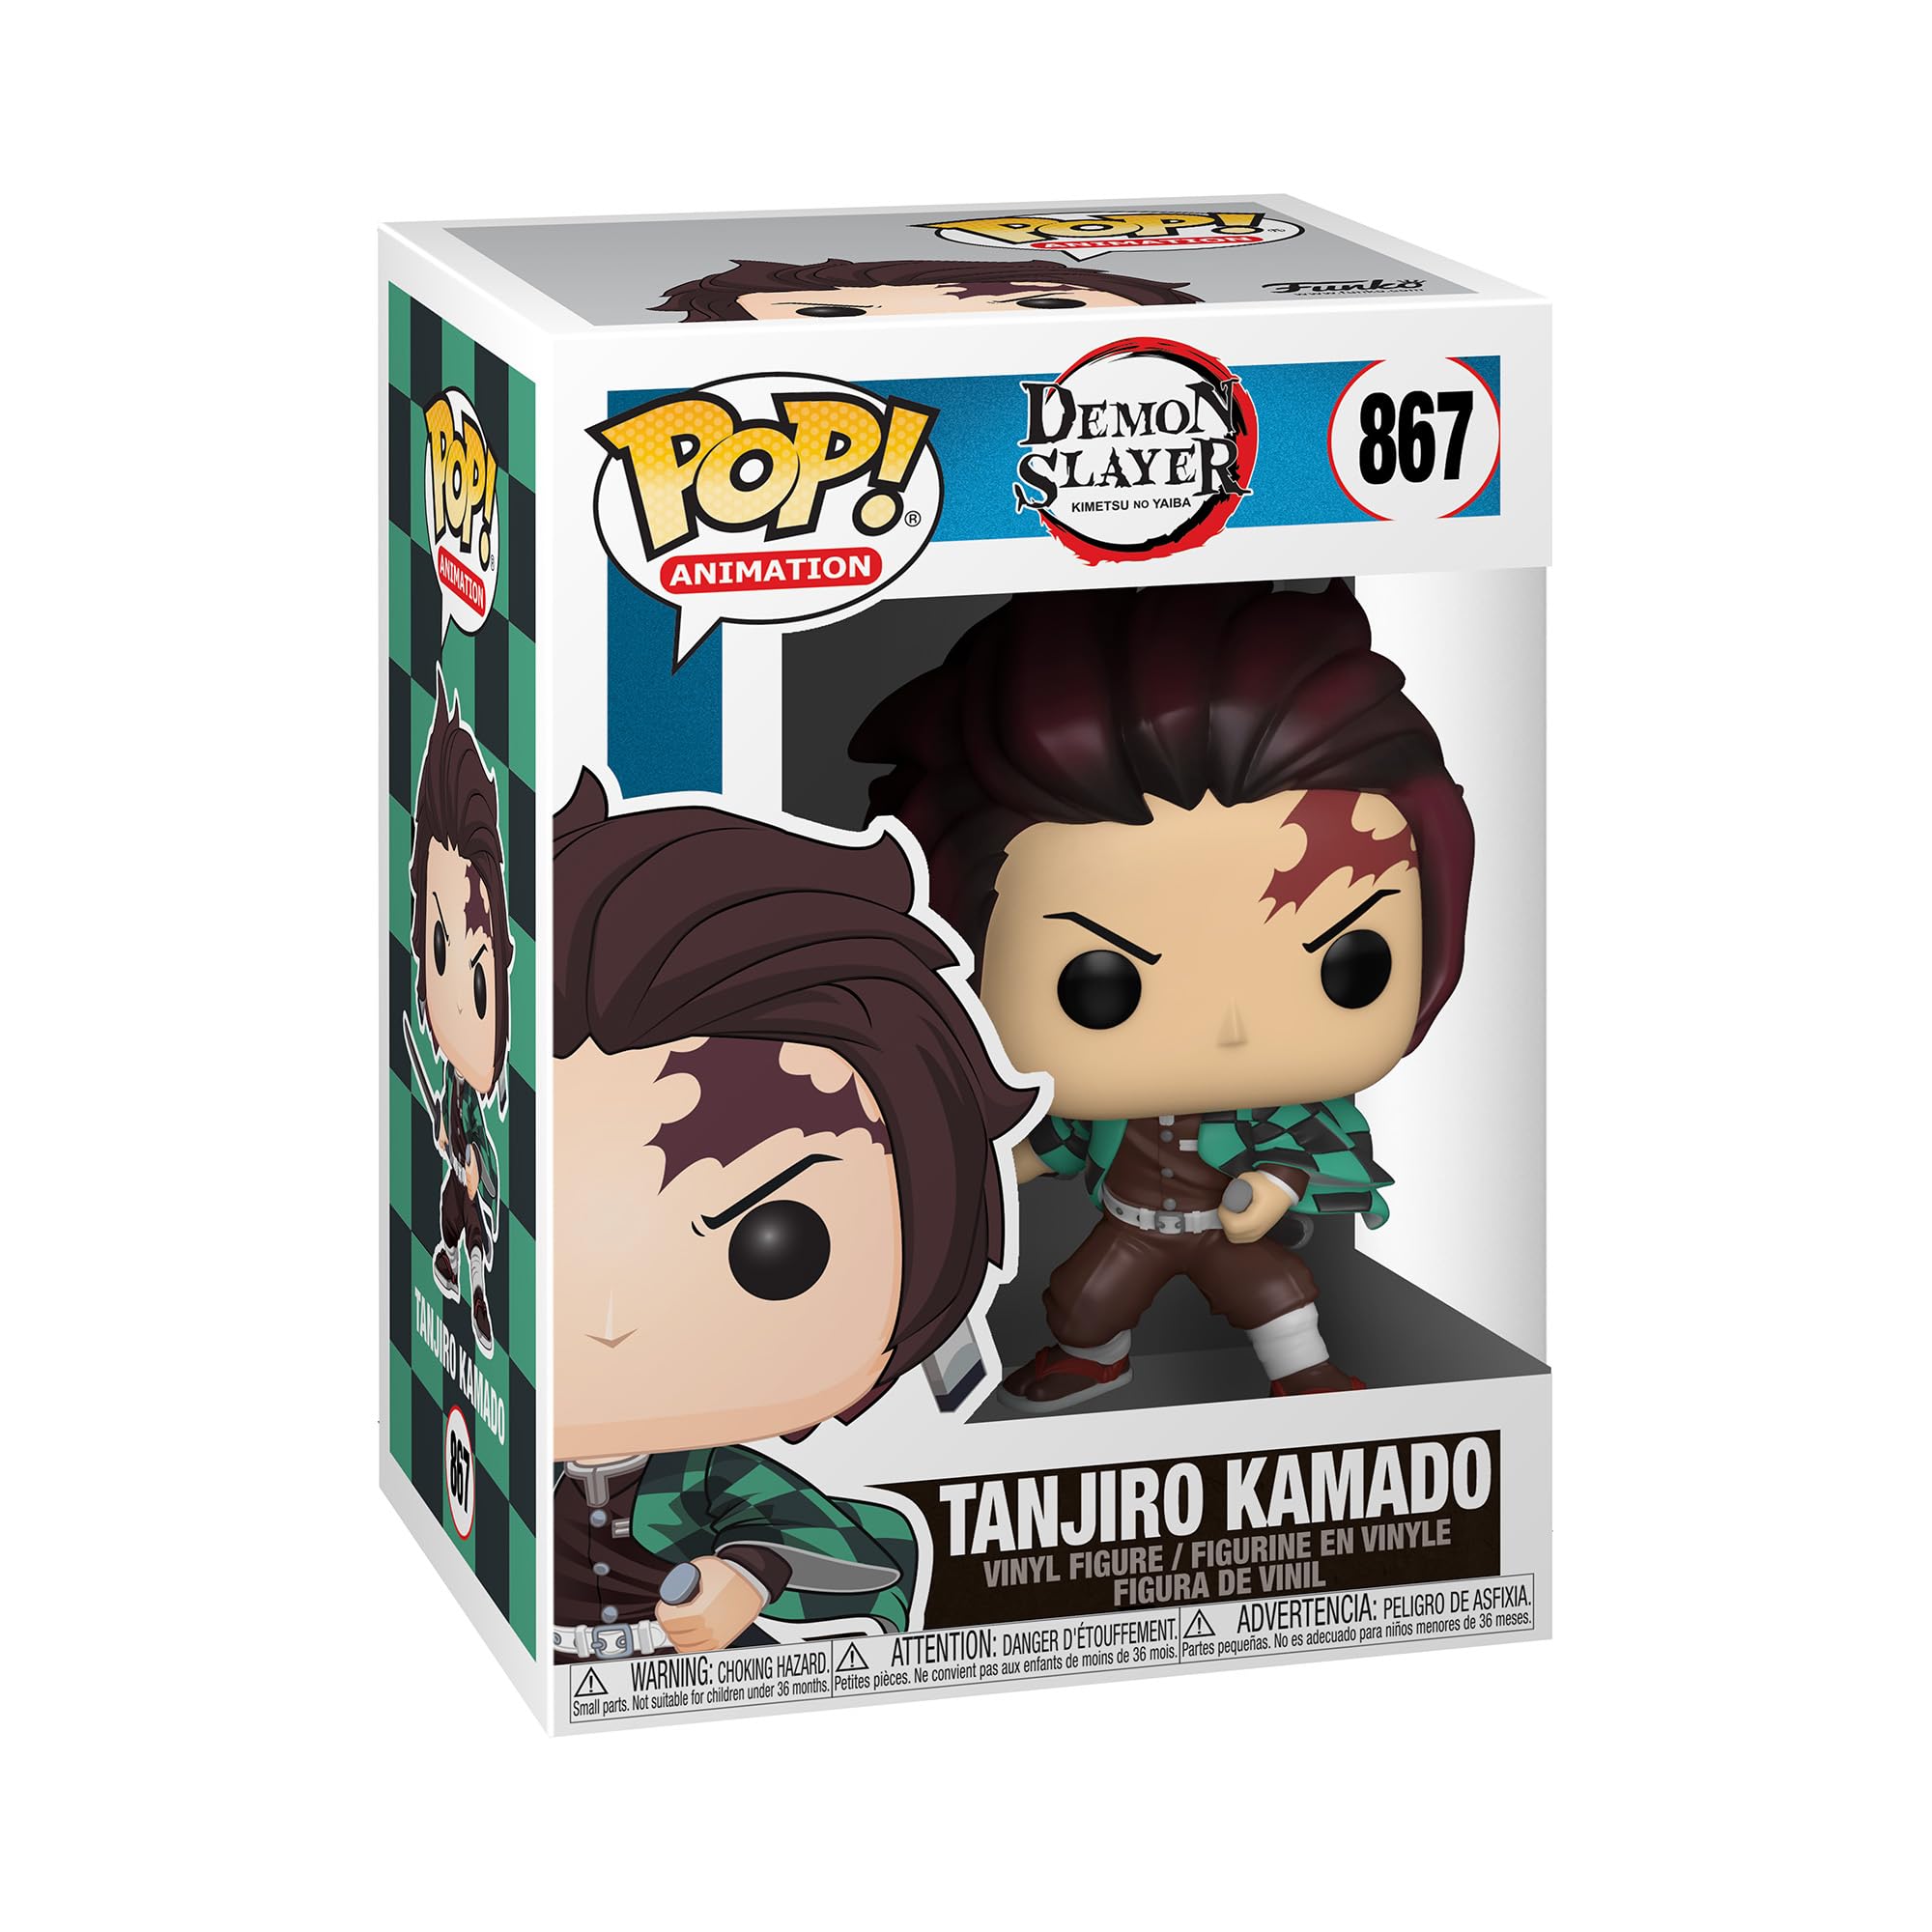 Anime Funko Pop Figures Have Had The Best Month Ever